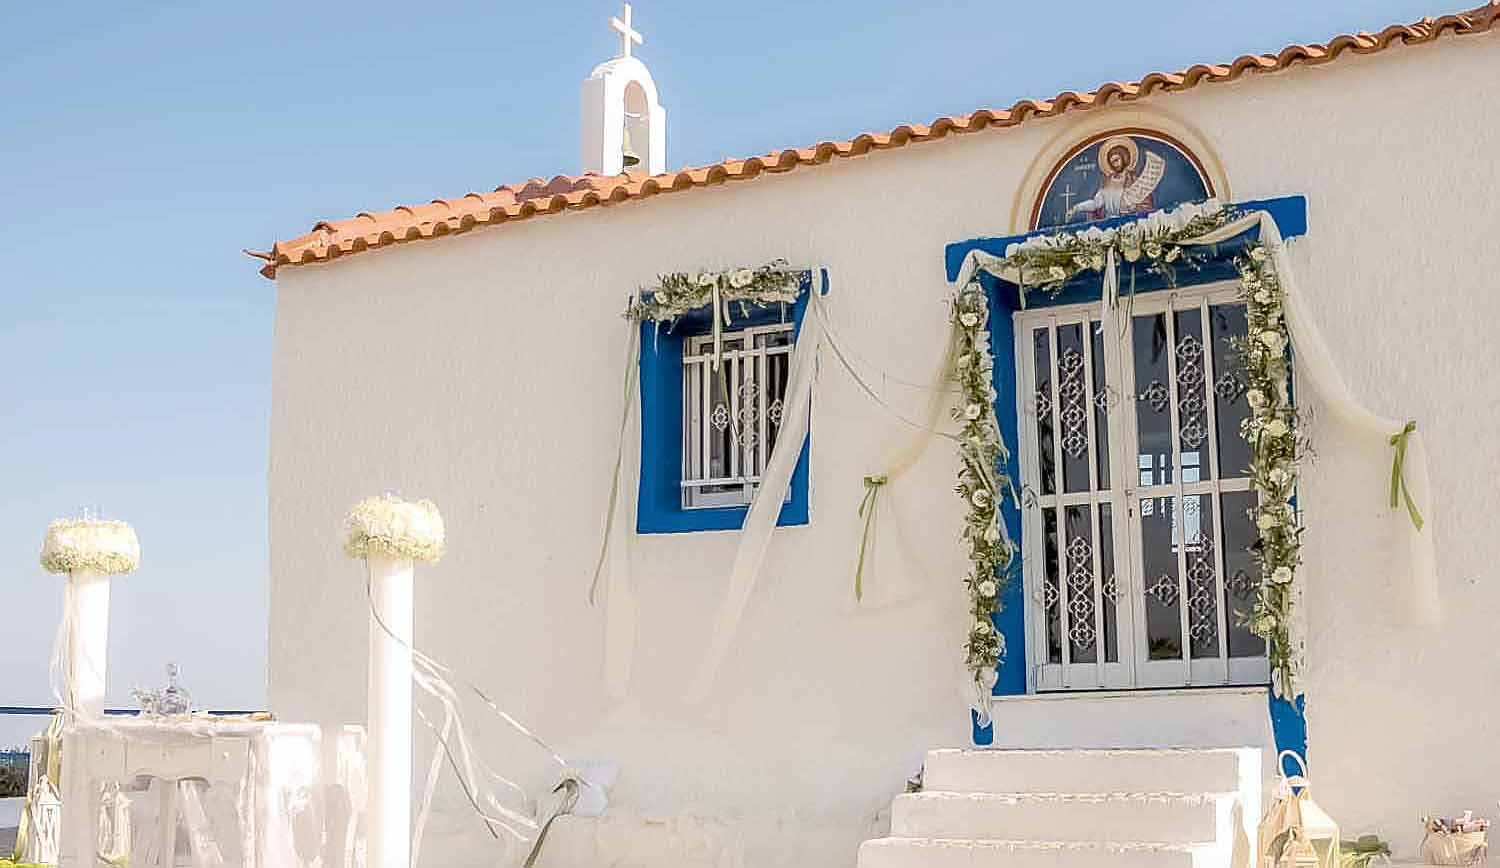 Church Agios Emilianos is located on the hilltop of an islet where you can find a unique beautiful beach